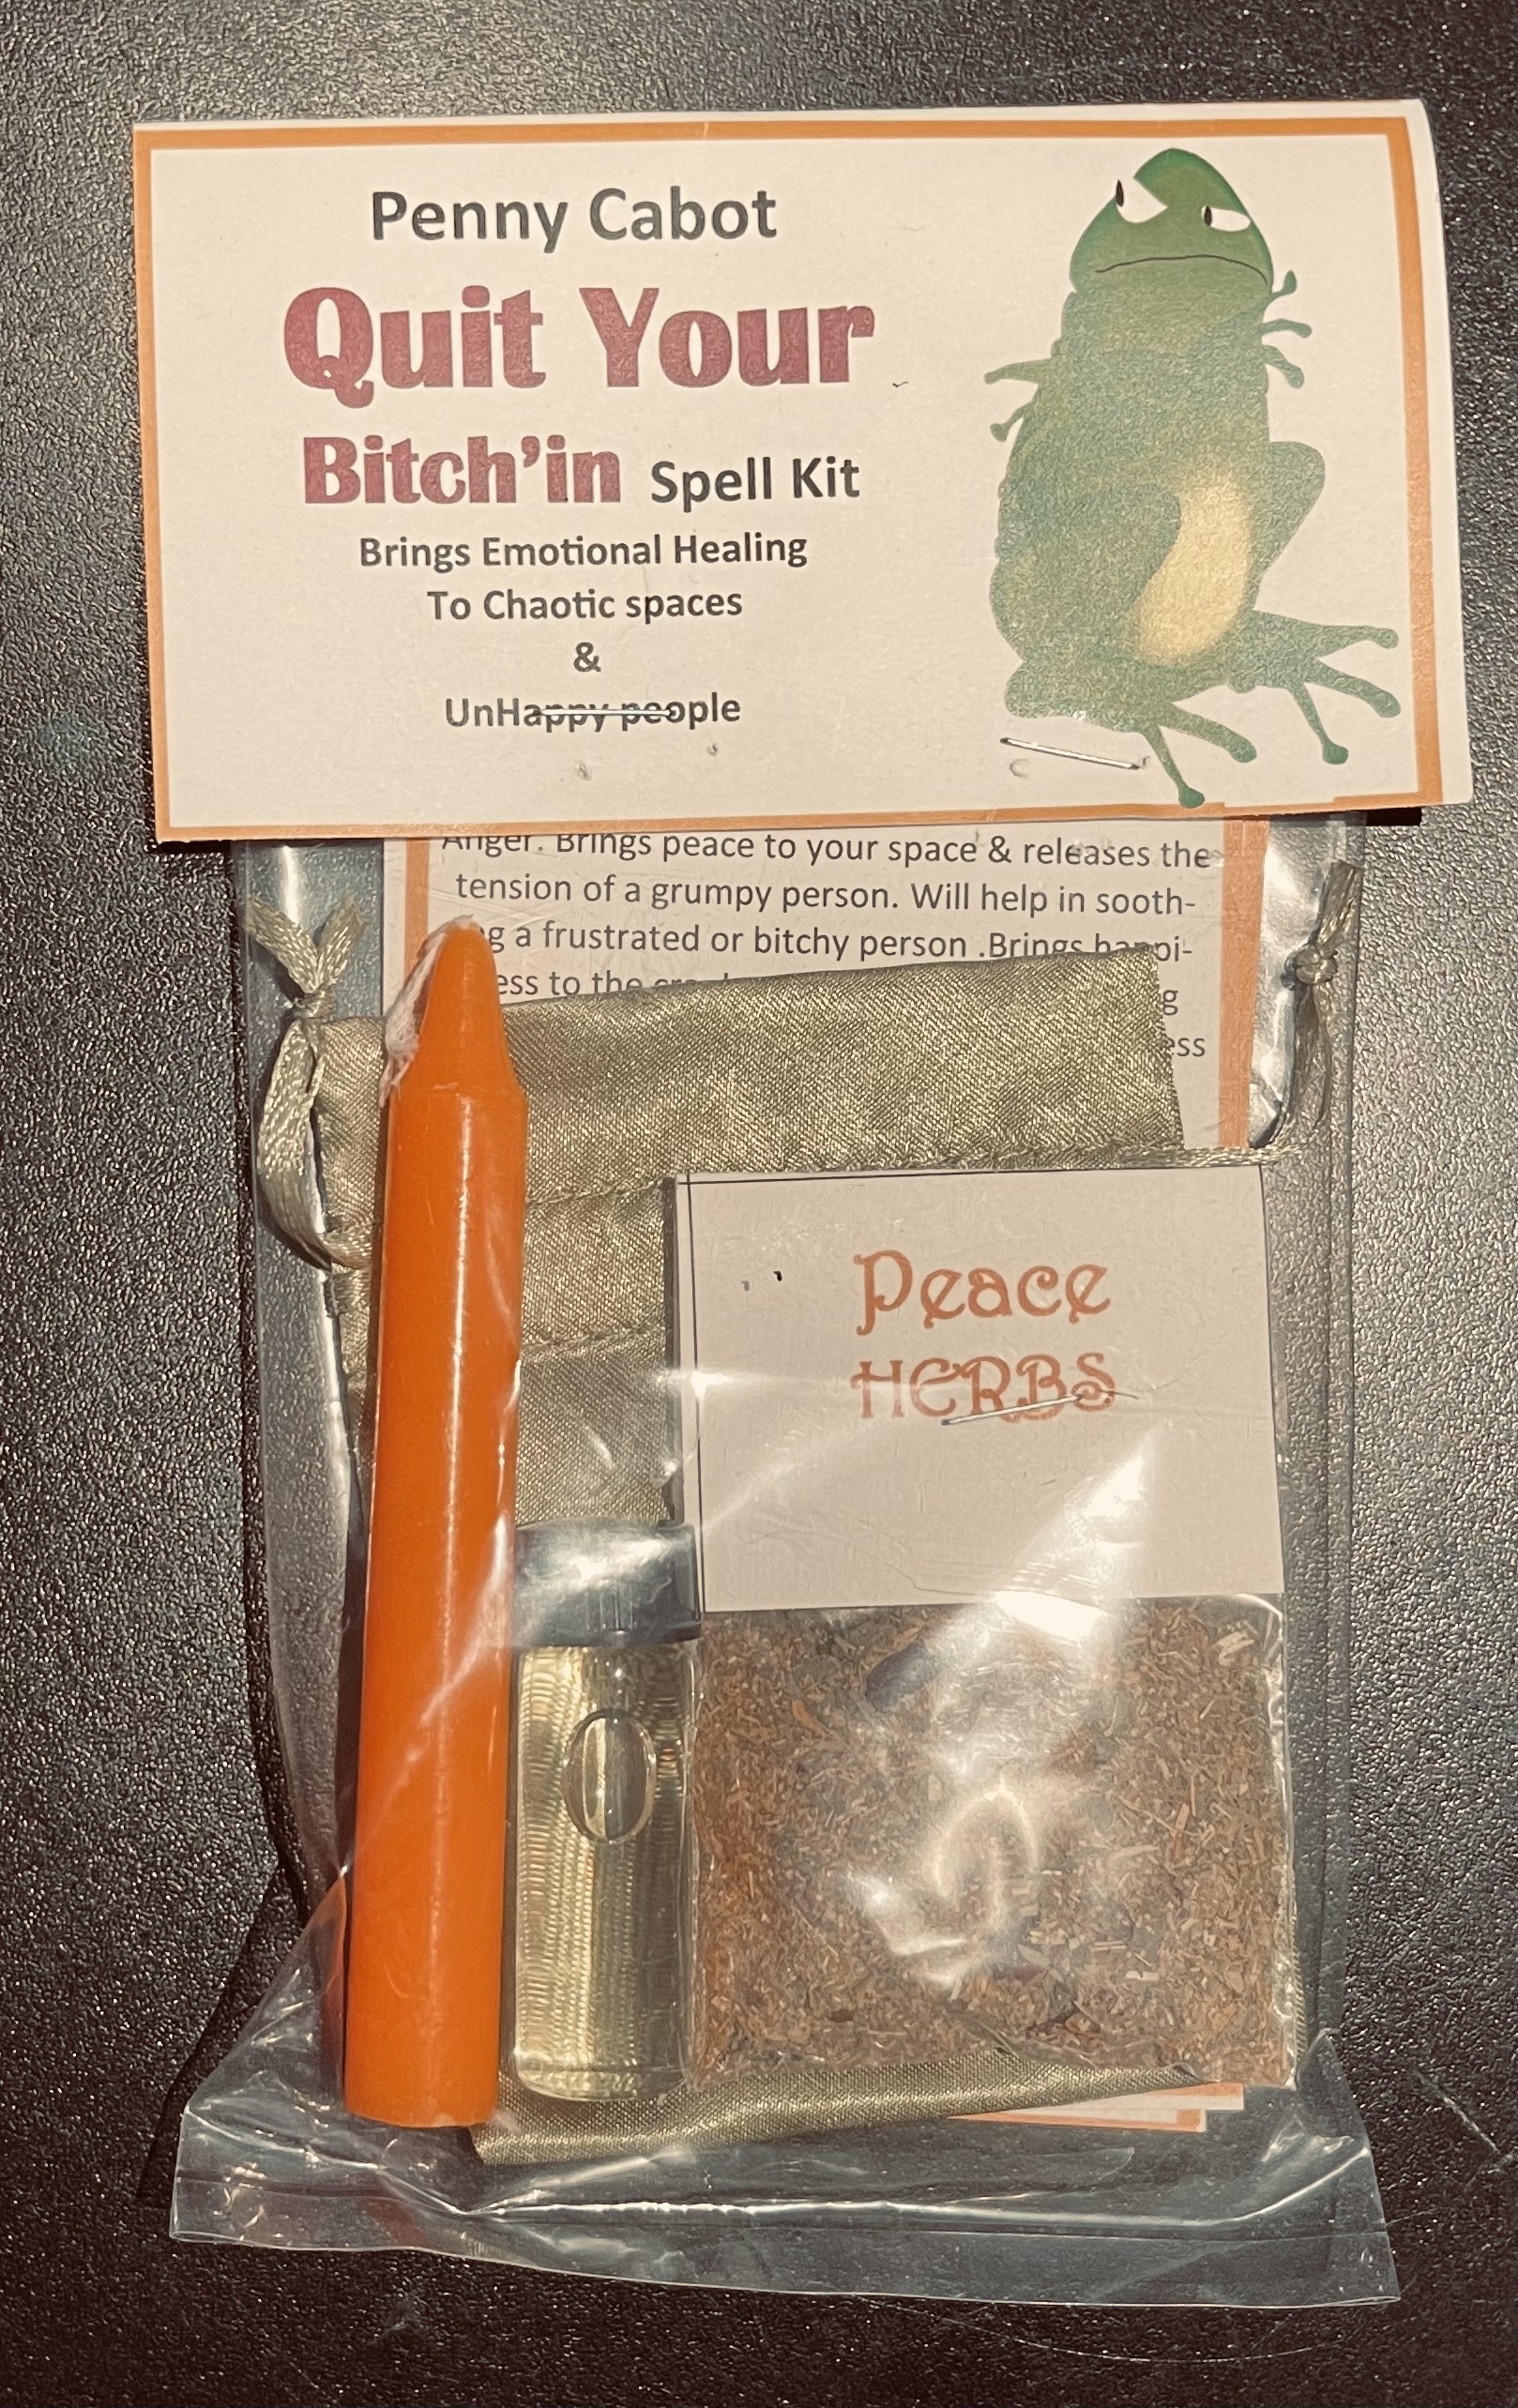 Quit Your Bitch'in Spell Kit by Penny Cabot